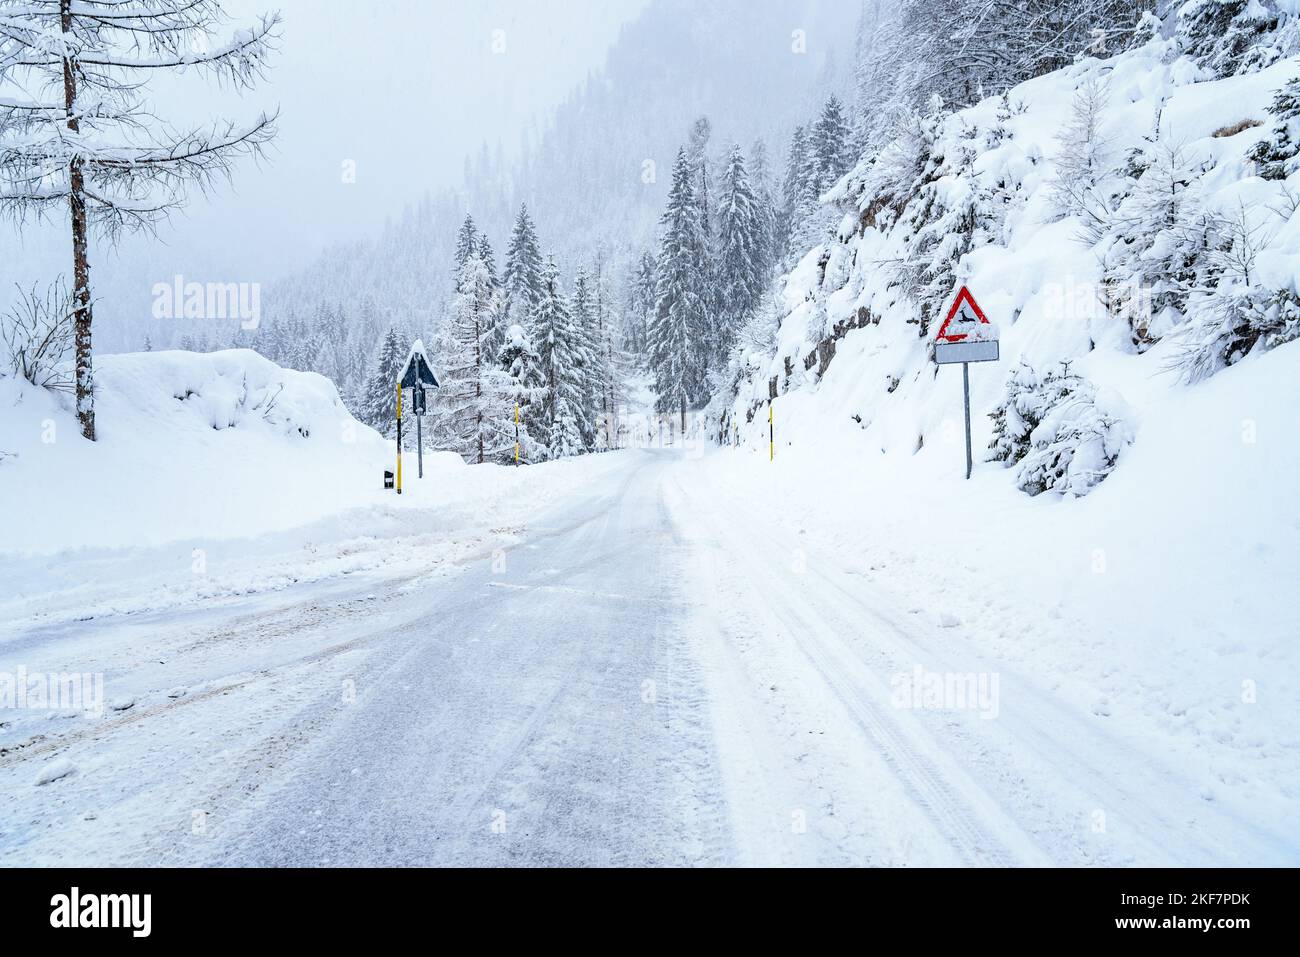 Snowy road in the European Alps during heavy snowfall Stock Photo